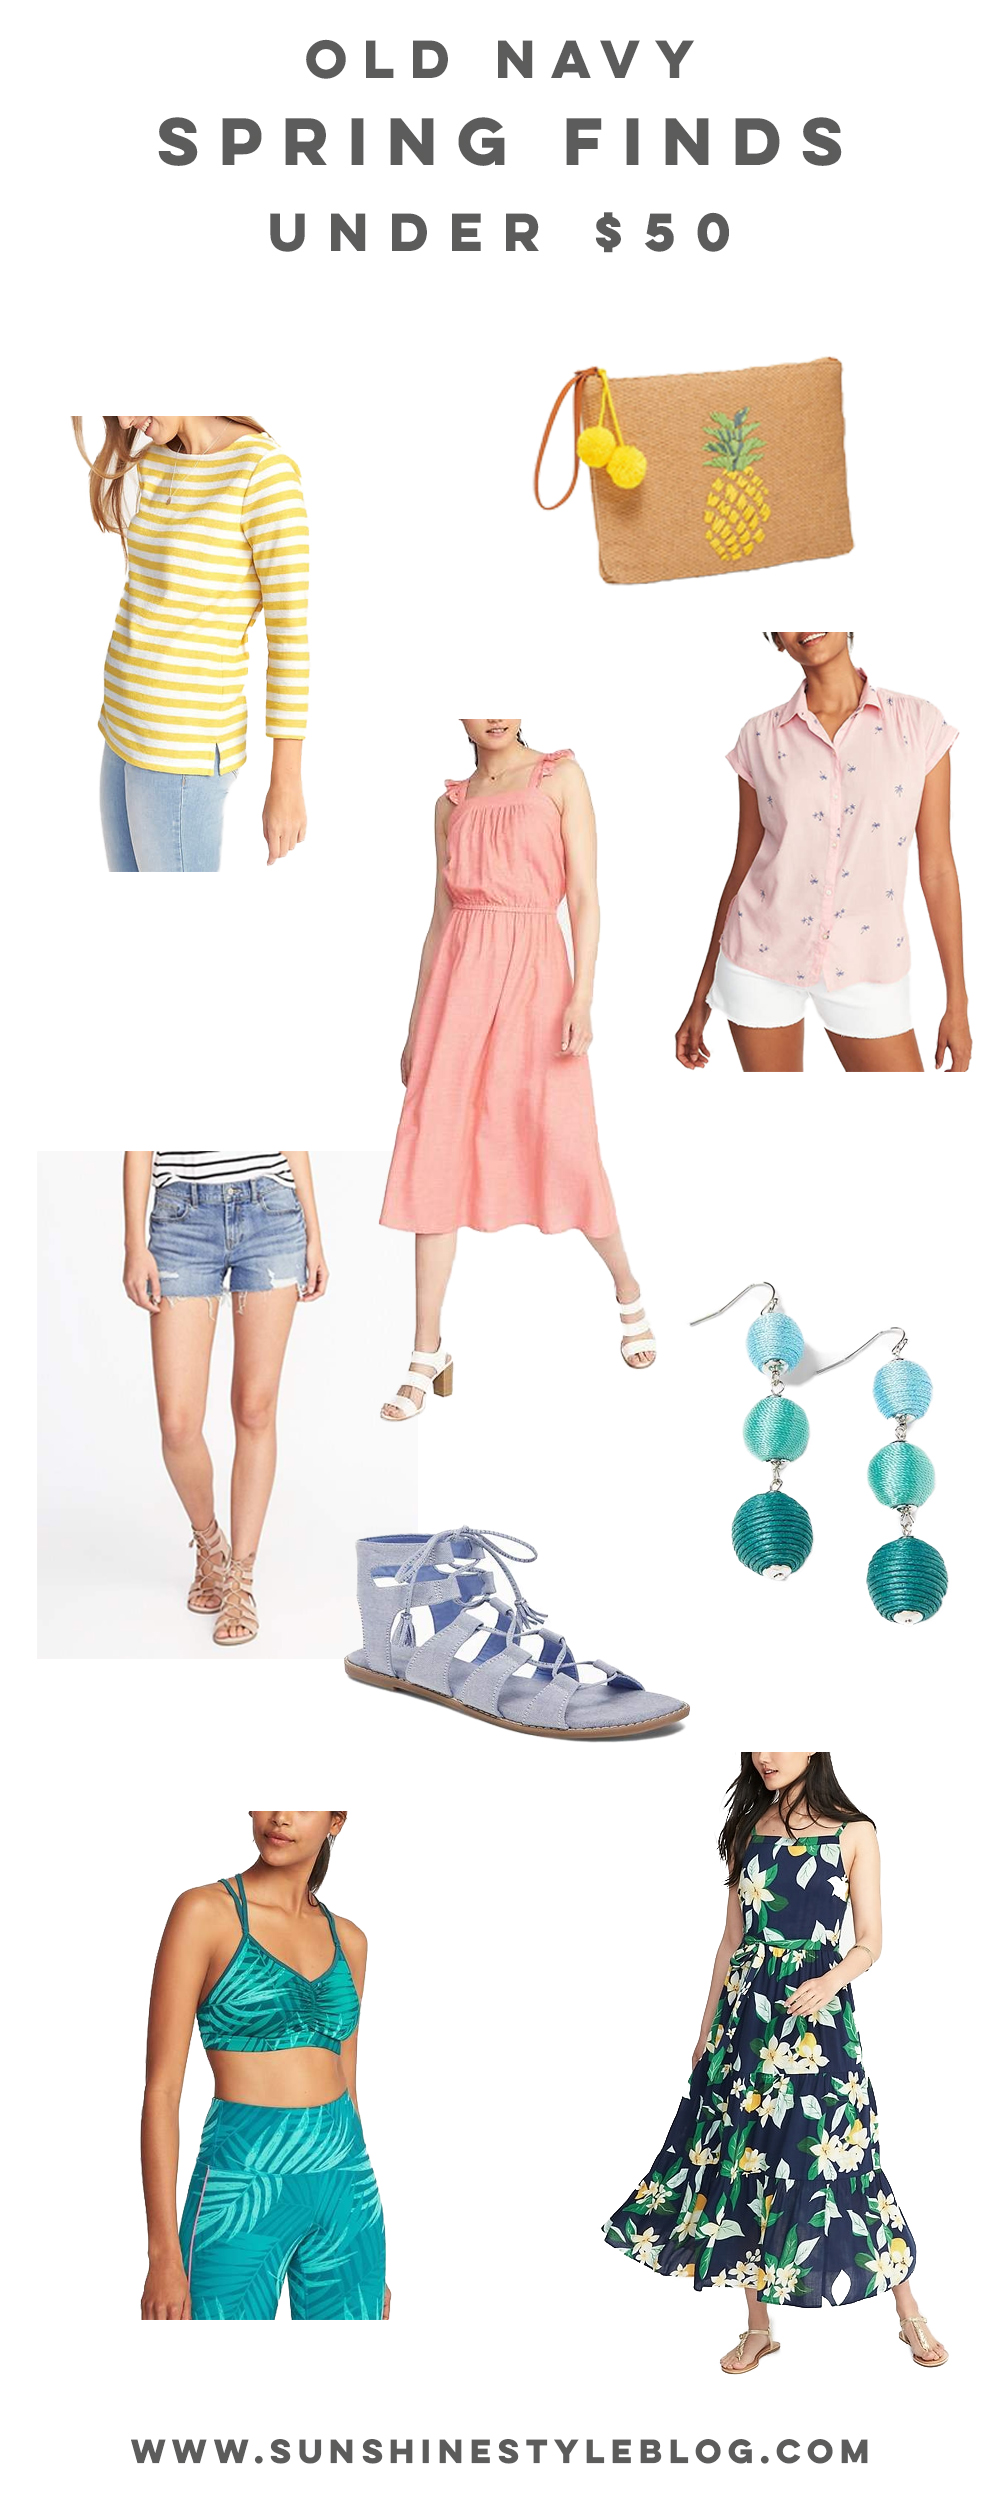 The Best Old Navy Spring Finds Under $50. If your on a budget, these cute spring pieces won't break the bank. 